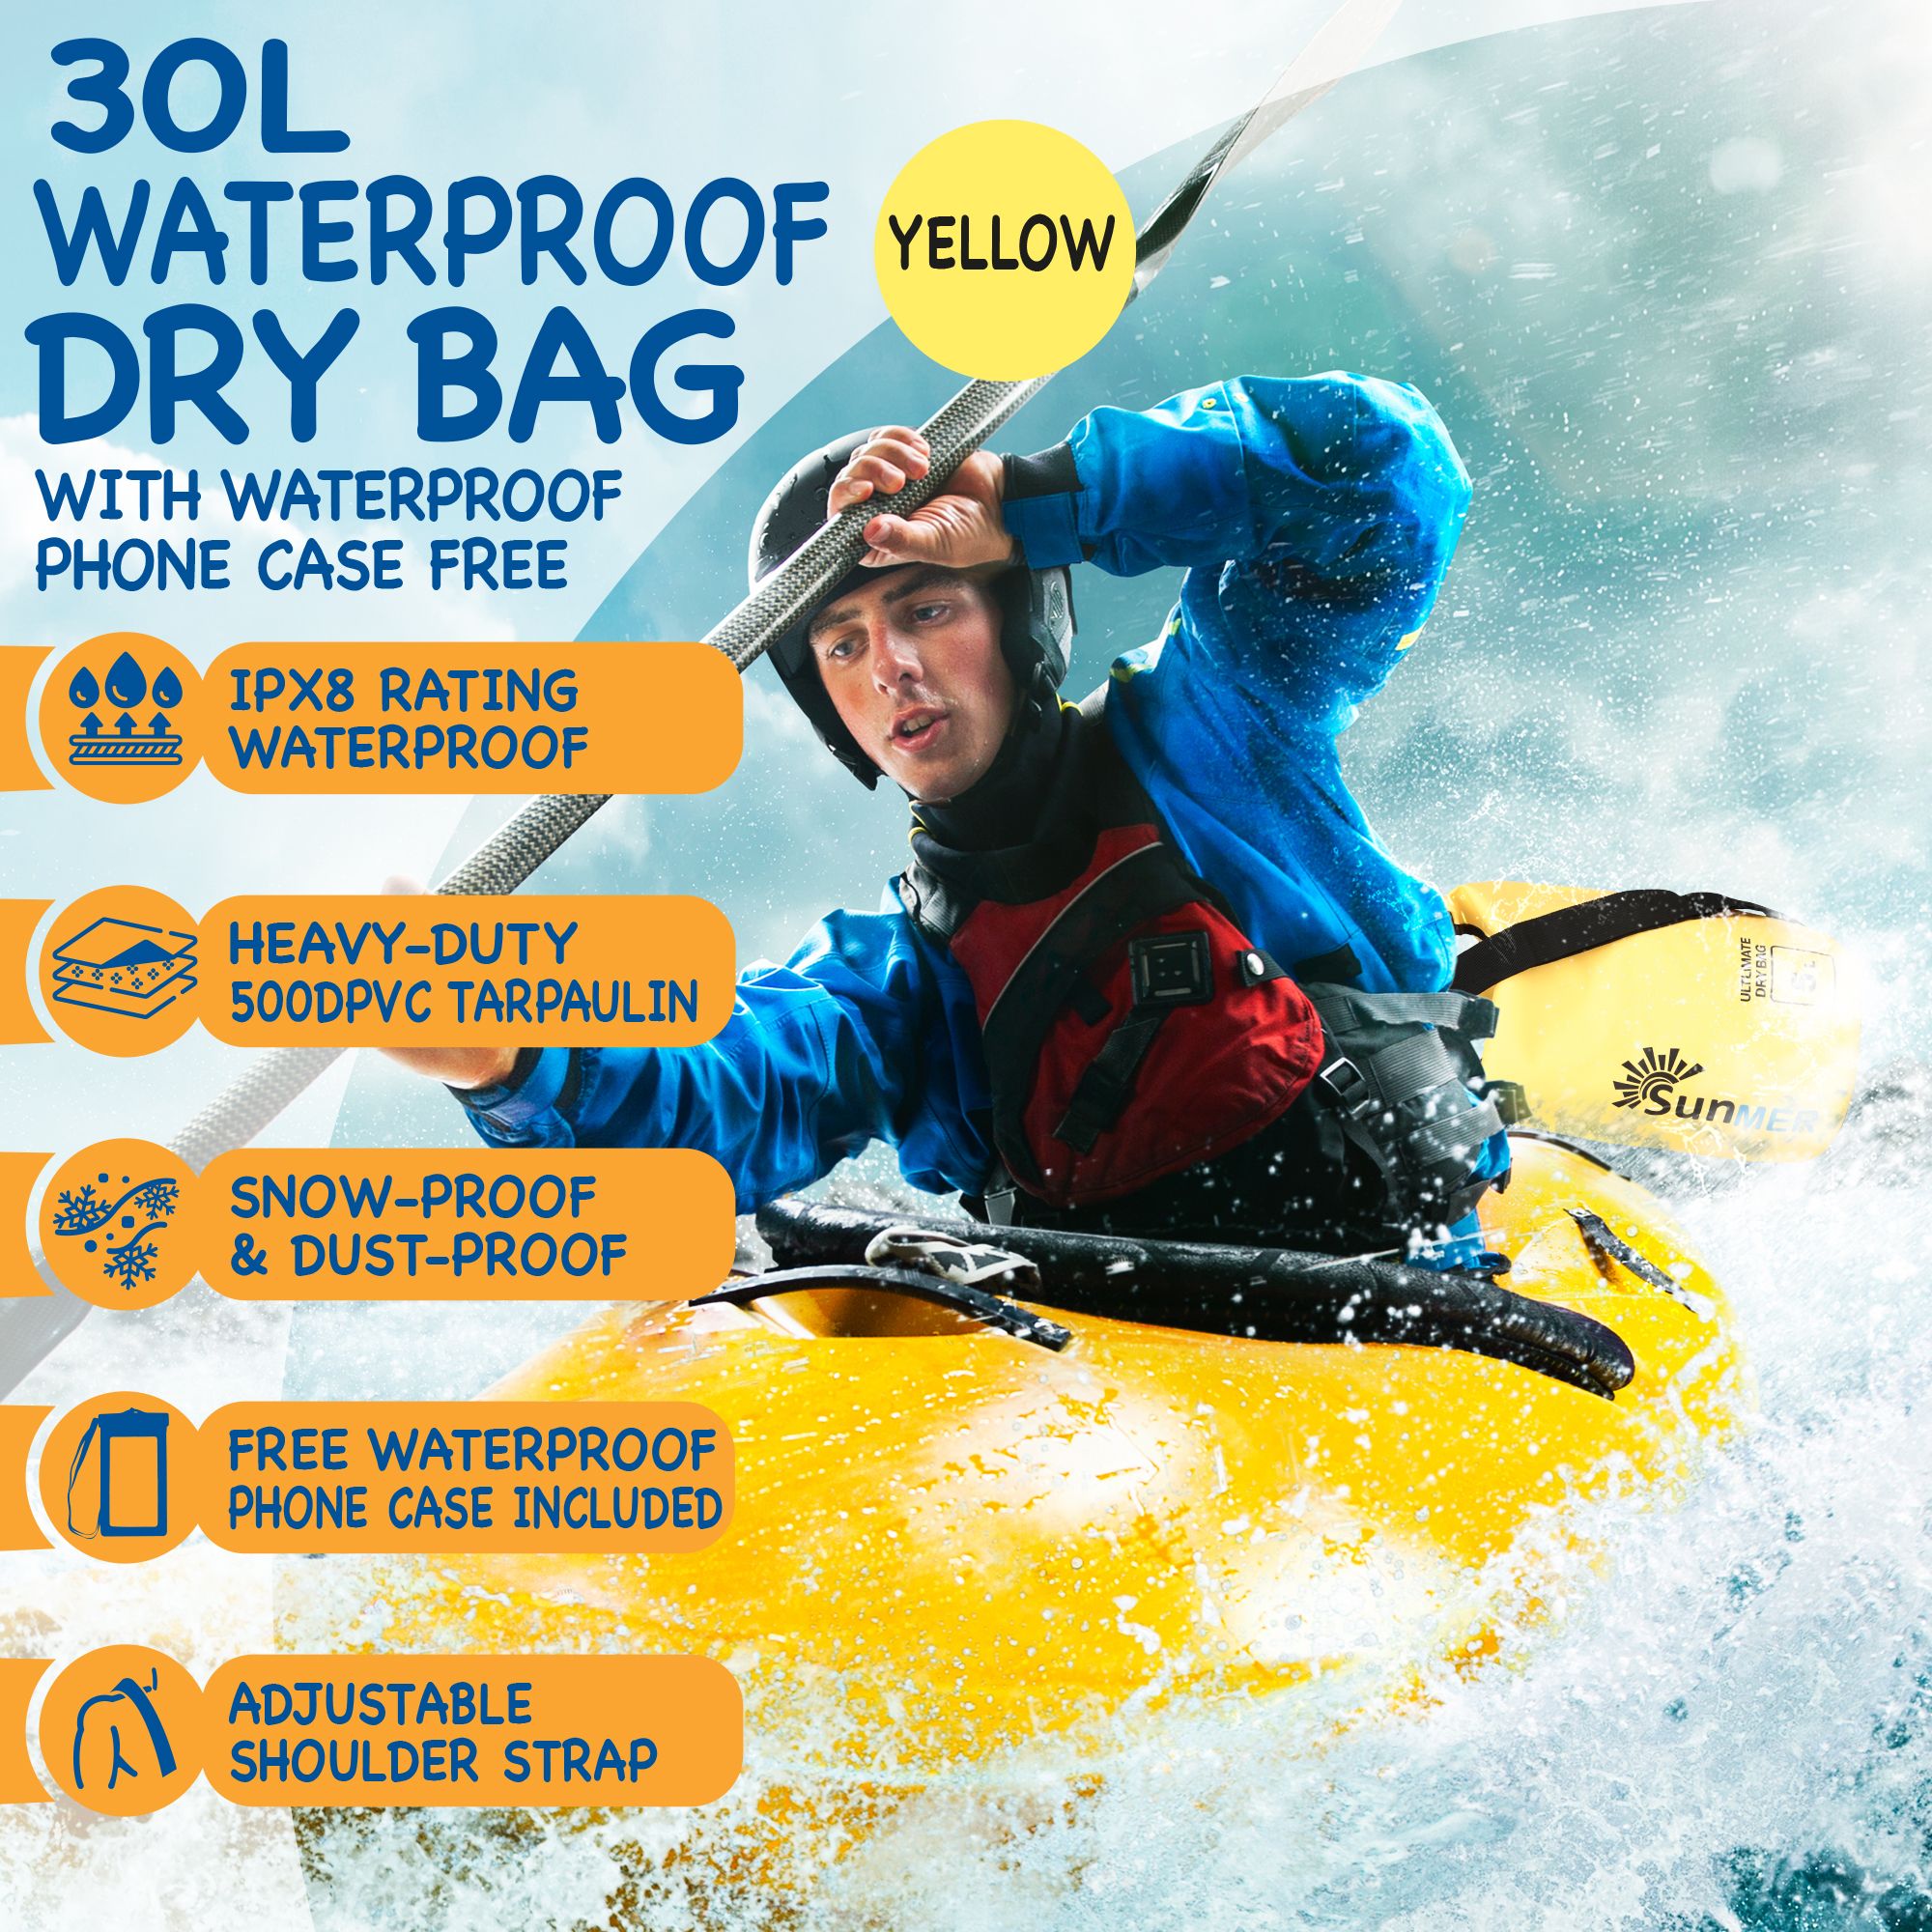 SUNMER 30L Dry Bag With Waterproof Phone Case - Yellow